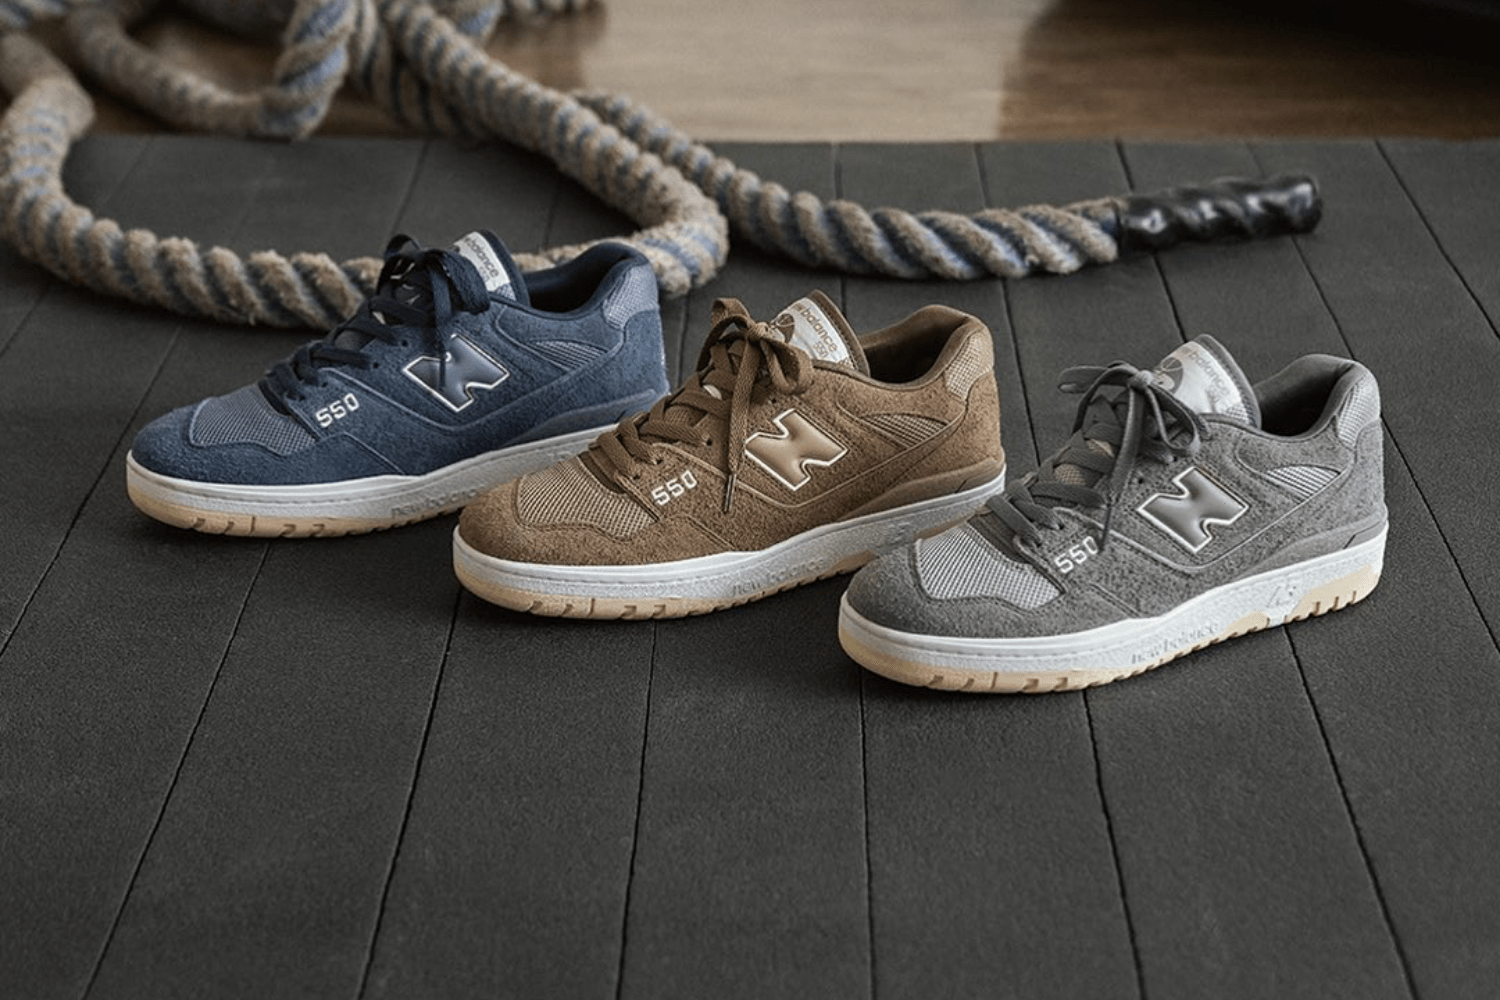 Get mega bargains at New Balance: up to 50% + 25% extra discount